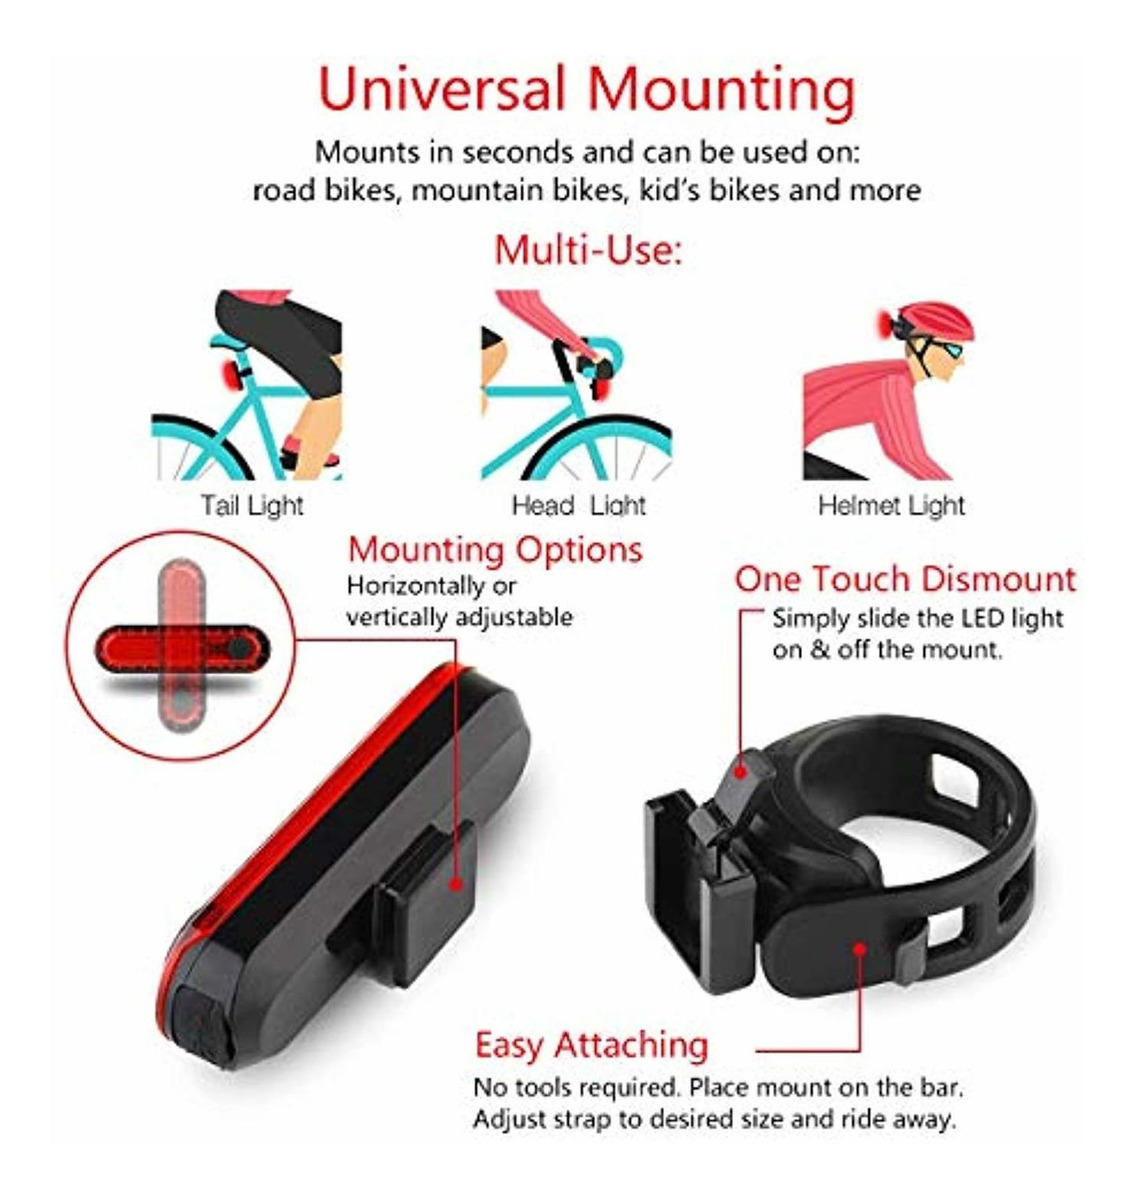 Yuwumin Rear Bike Tail Light,Ultra Bright USB Rechargeable Volcano Bicycle Taillights,Red High Intensity Led Accessories Fits On Any Road Bikes,Helmets.Easy to Install for Cycling Safety Flashlight